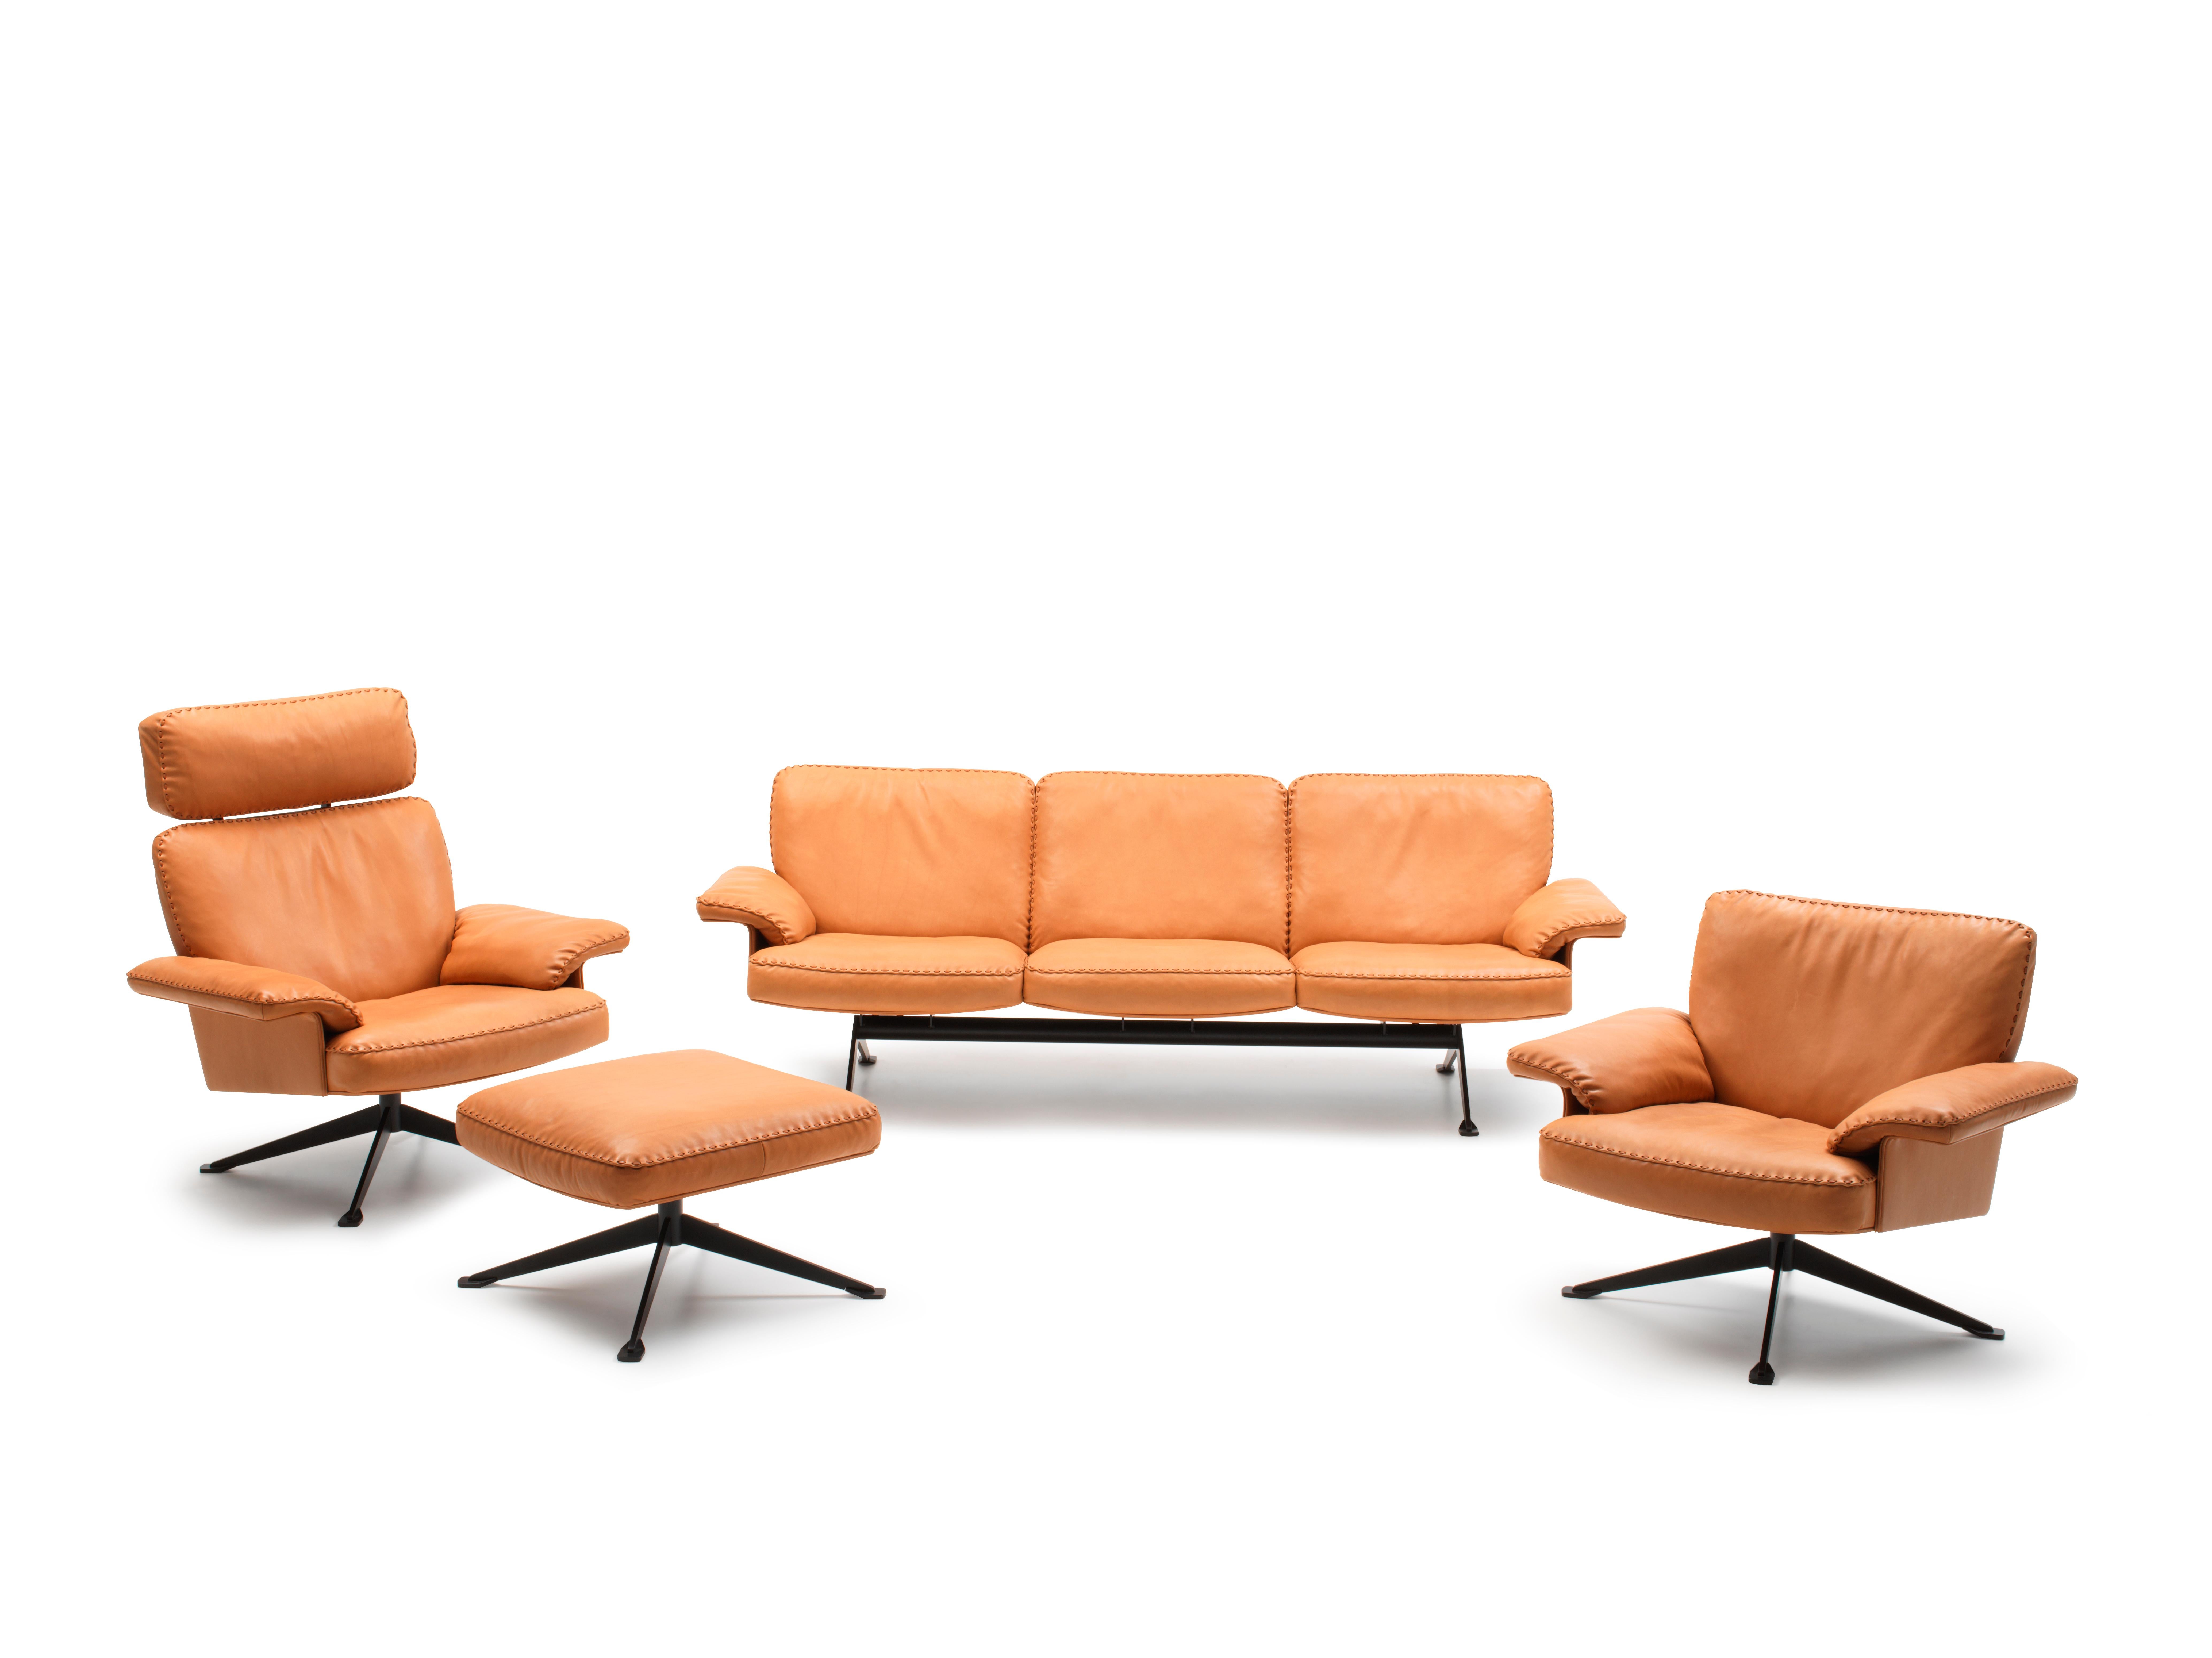 Steel DS-31 Leather Sofa, Swivelling Armchair and Ottoman Set by De Sede